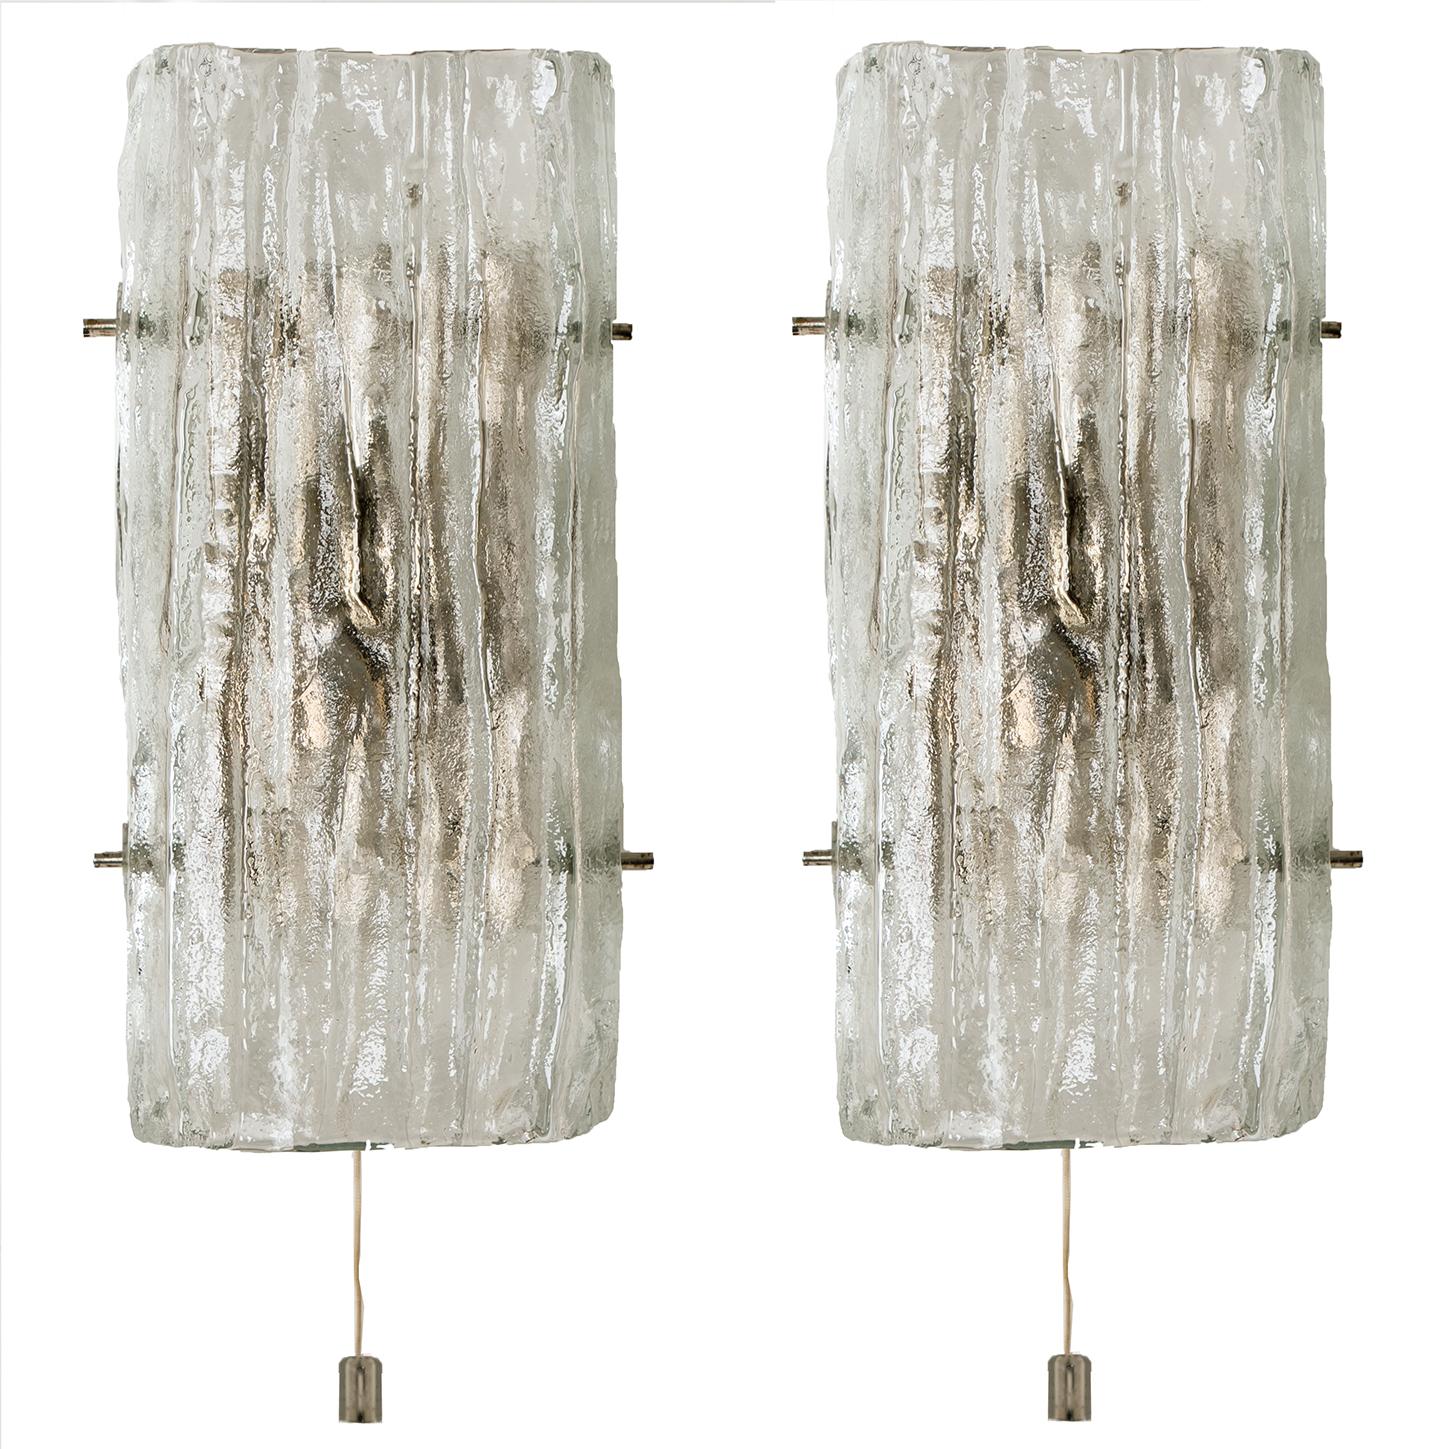 A set of two glass sconces model by Kalmar, Vienna, Austria. Manufactured in circa 1970.They are made of a silver painted metal backplate which holds a textured and frosted glass lampshade.

The sconces have a pull-string (on and off) on the